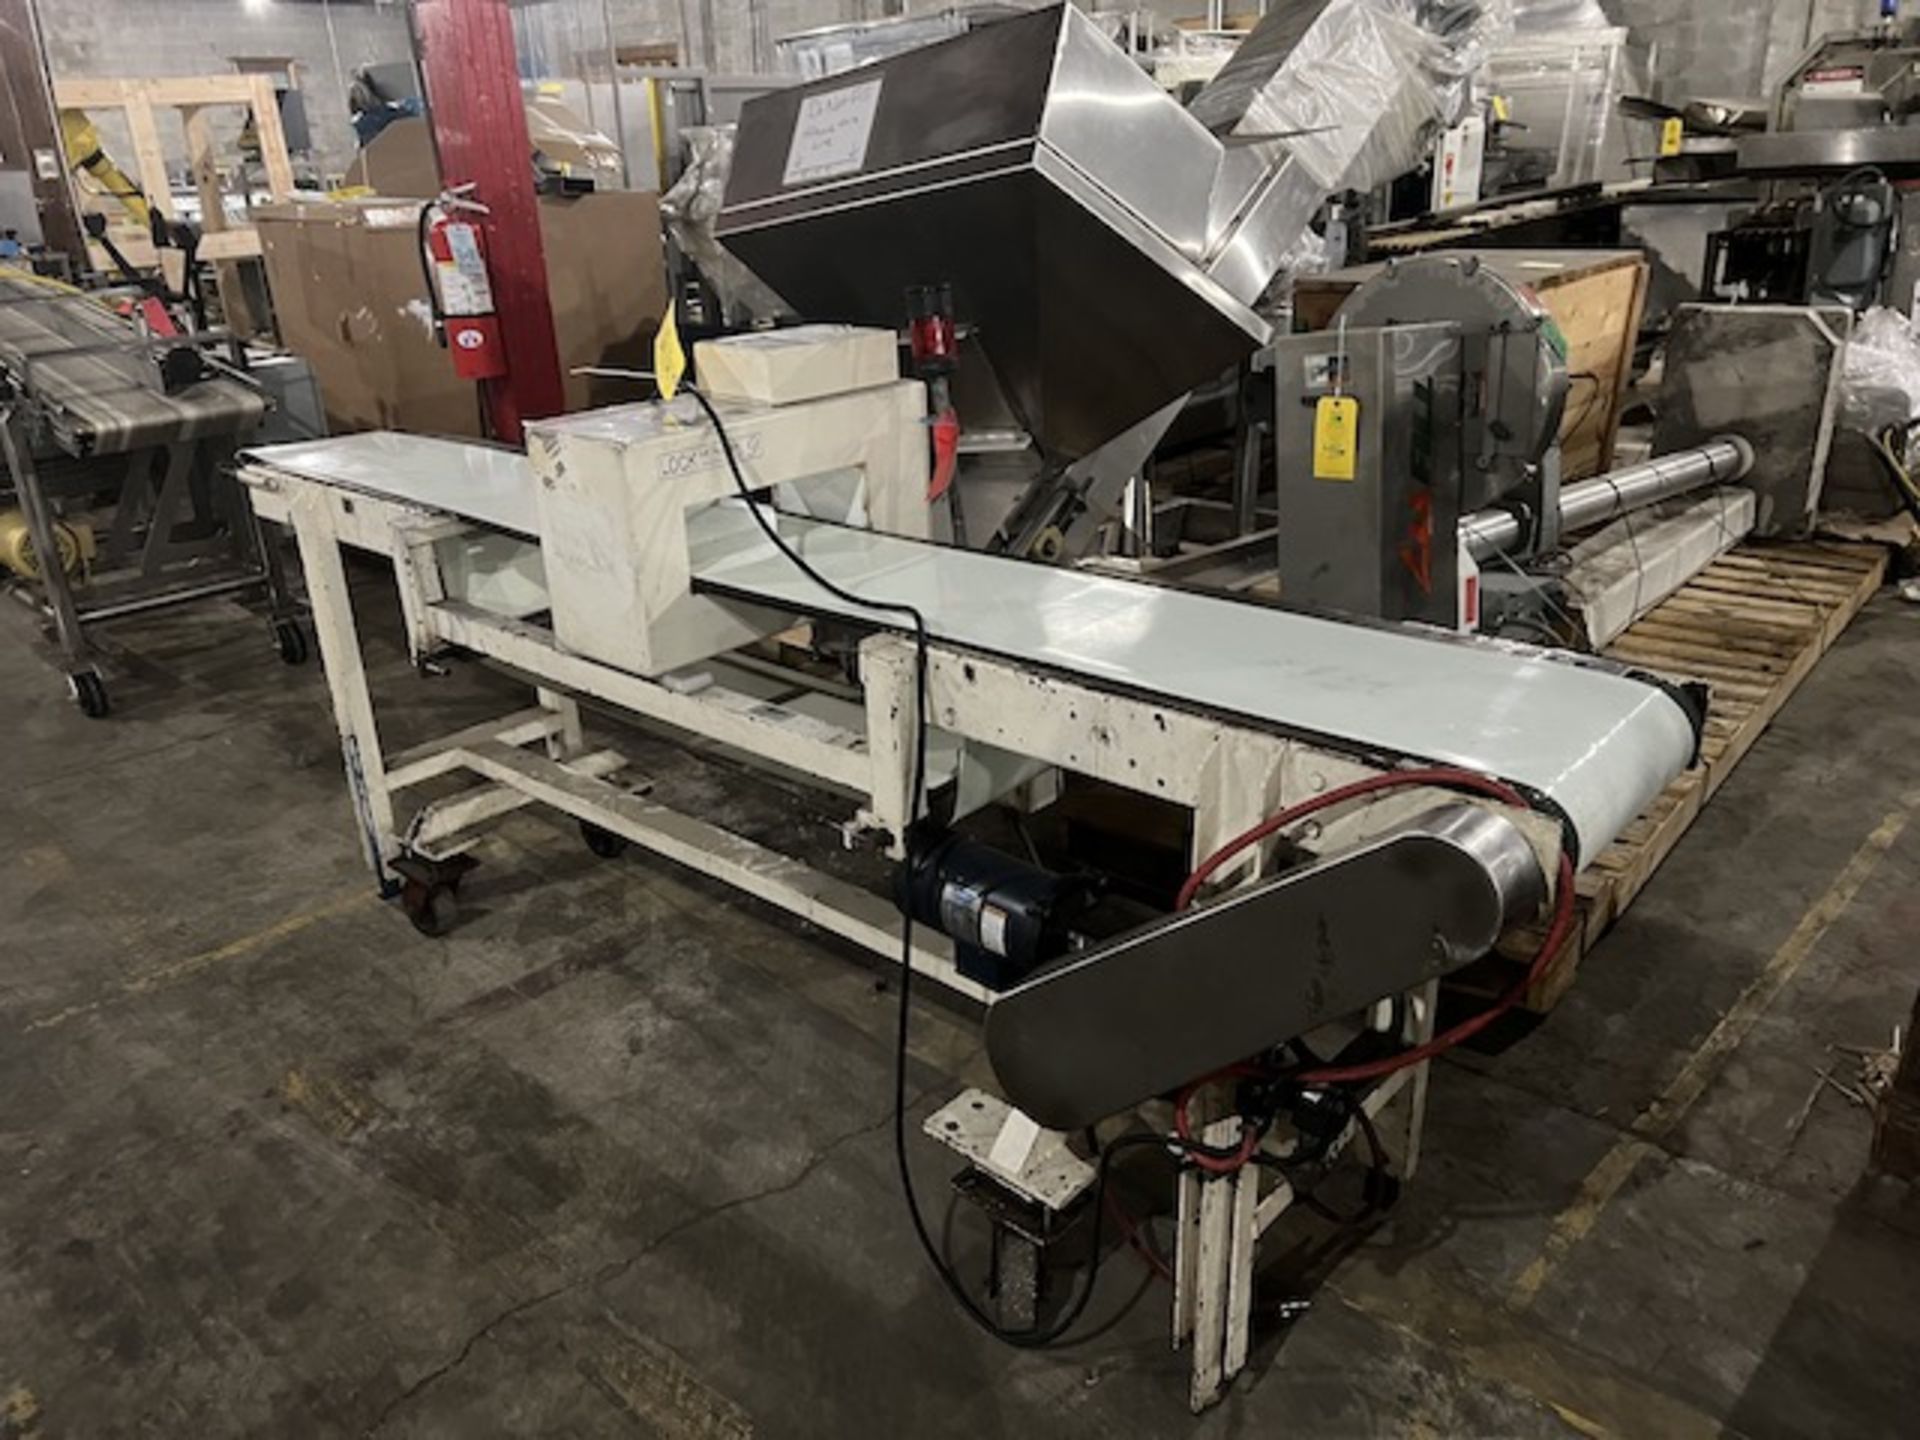 Metalchek 9 Inspection Systems Metal Detector & Conveyor, 12" W x 104" L, Located in Ottawa, OH - Image 2 of 5